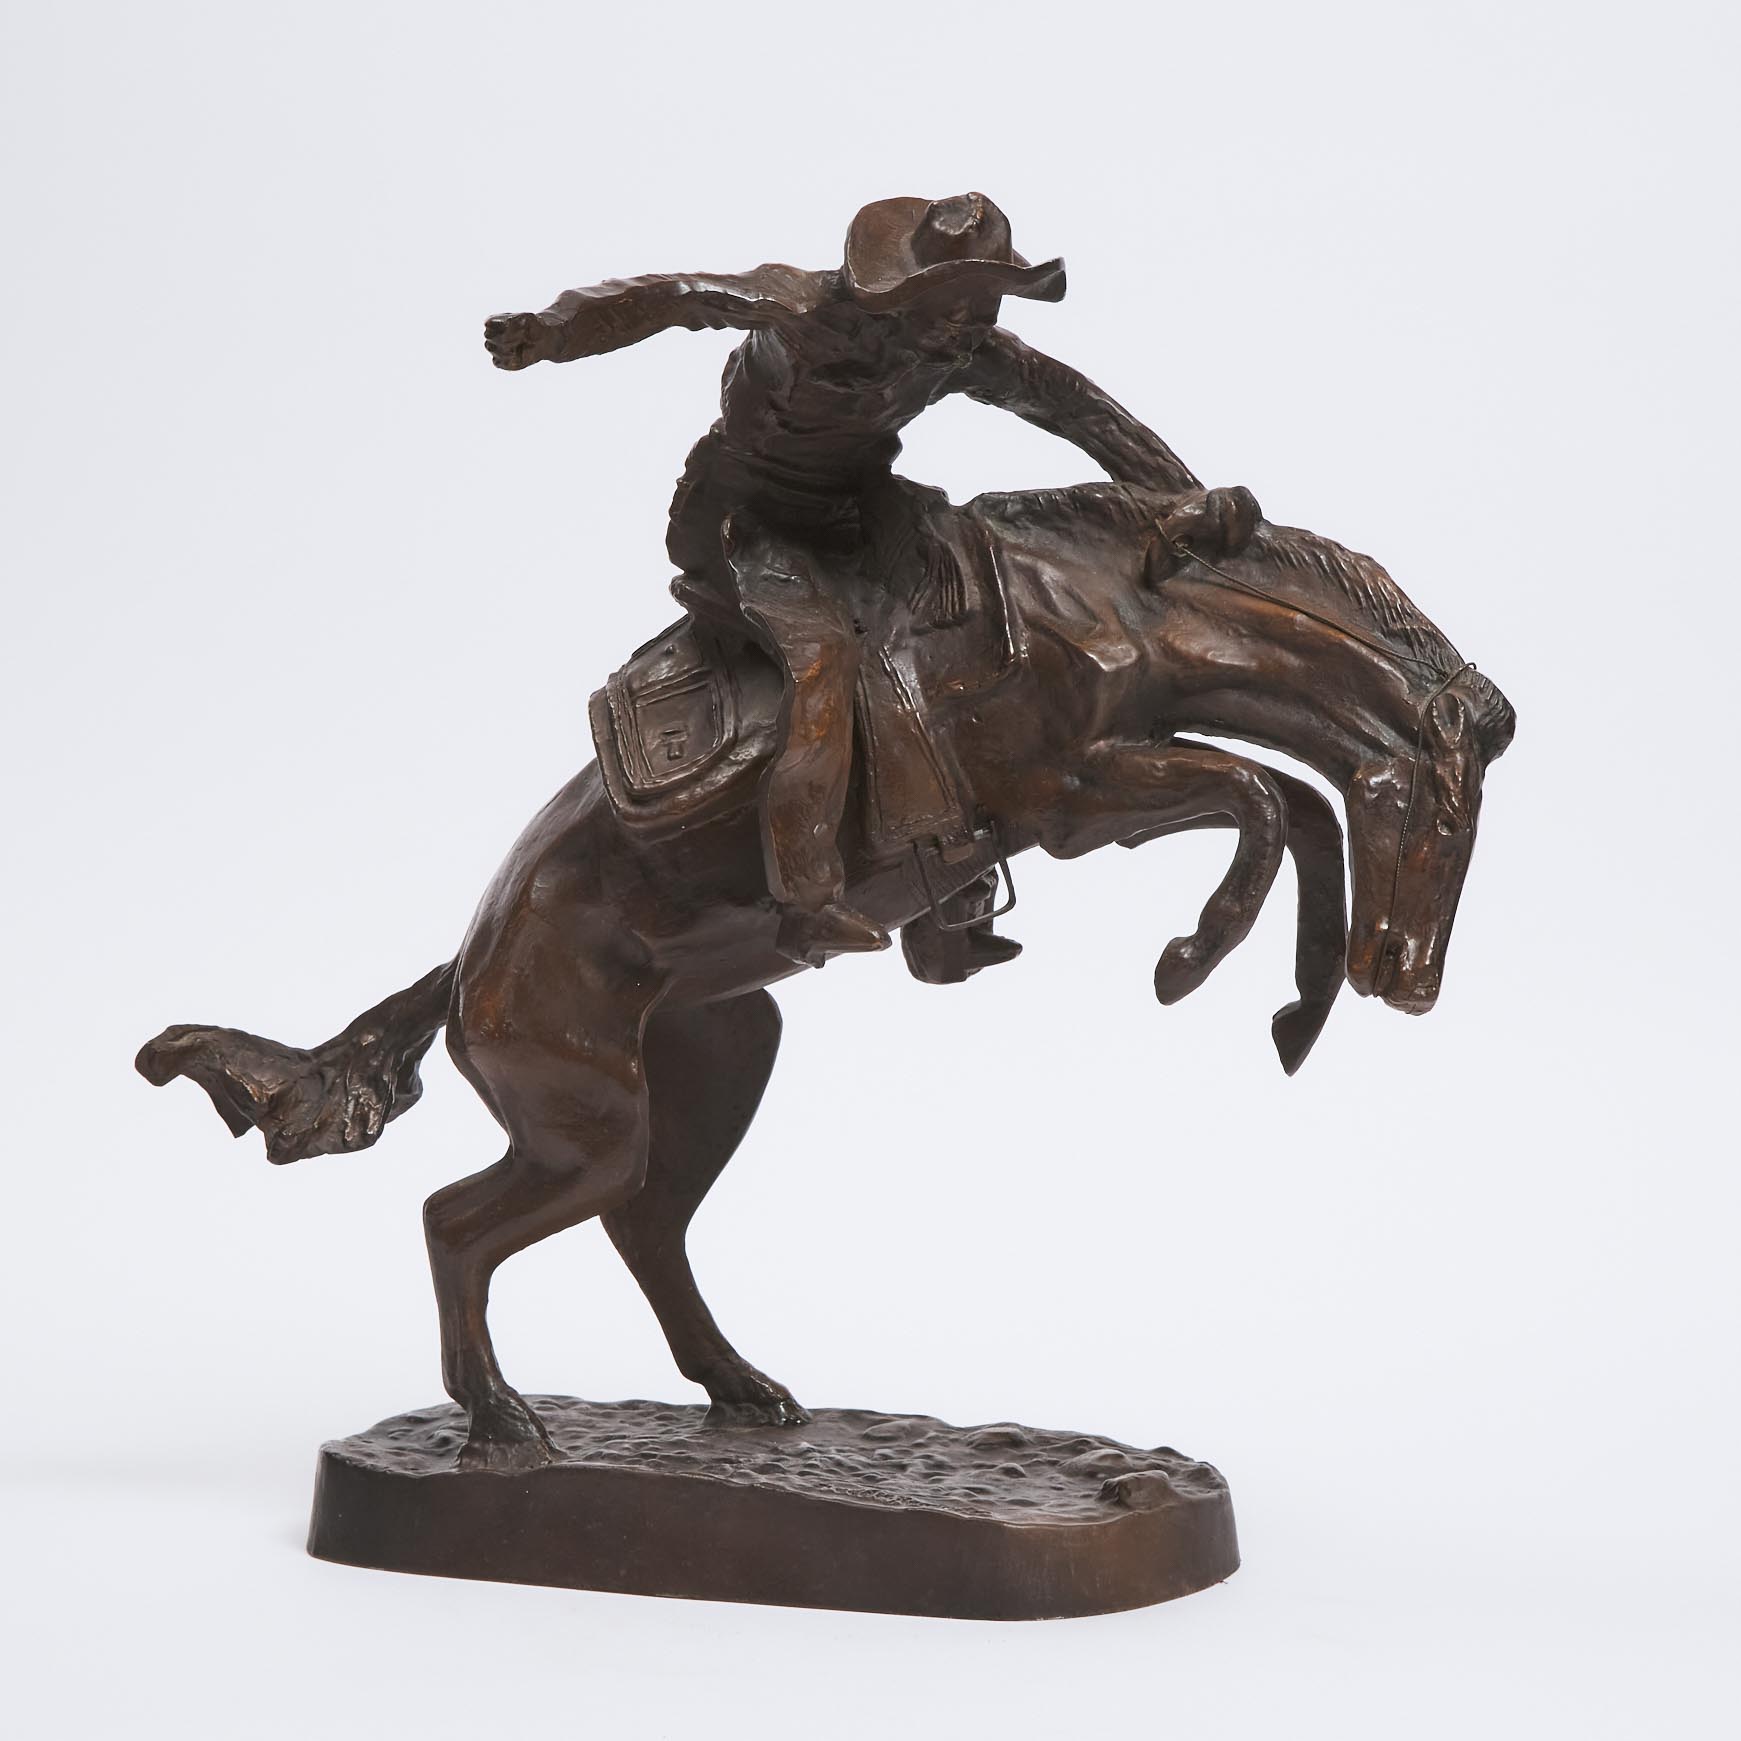 After Frederic Sackrider Remington 3ababb